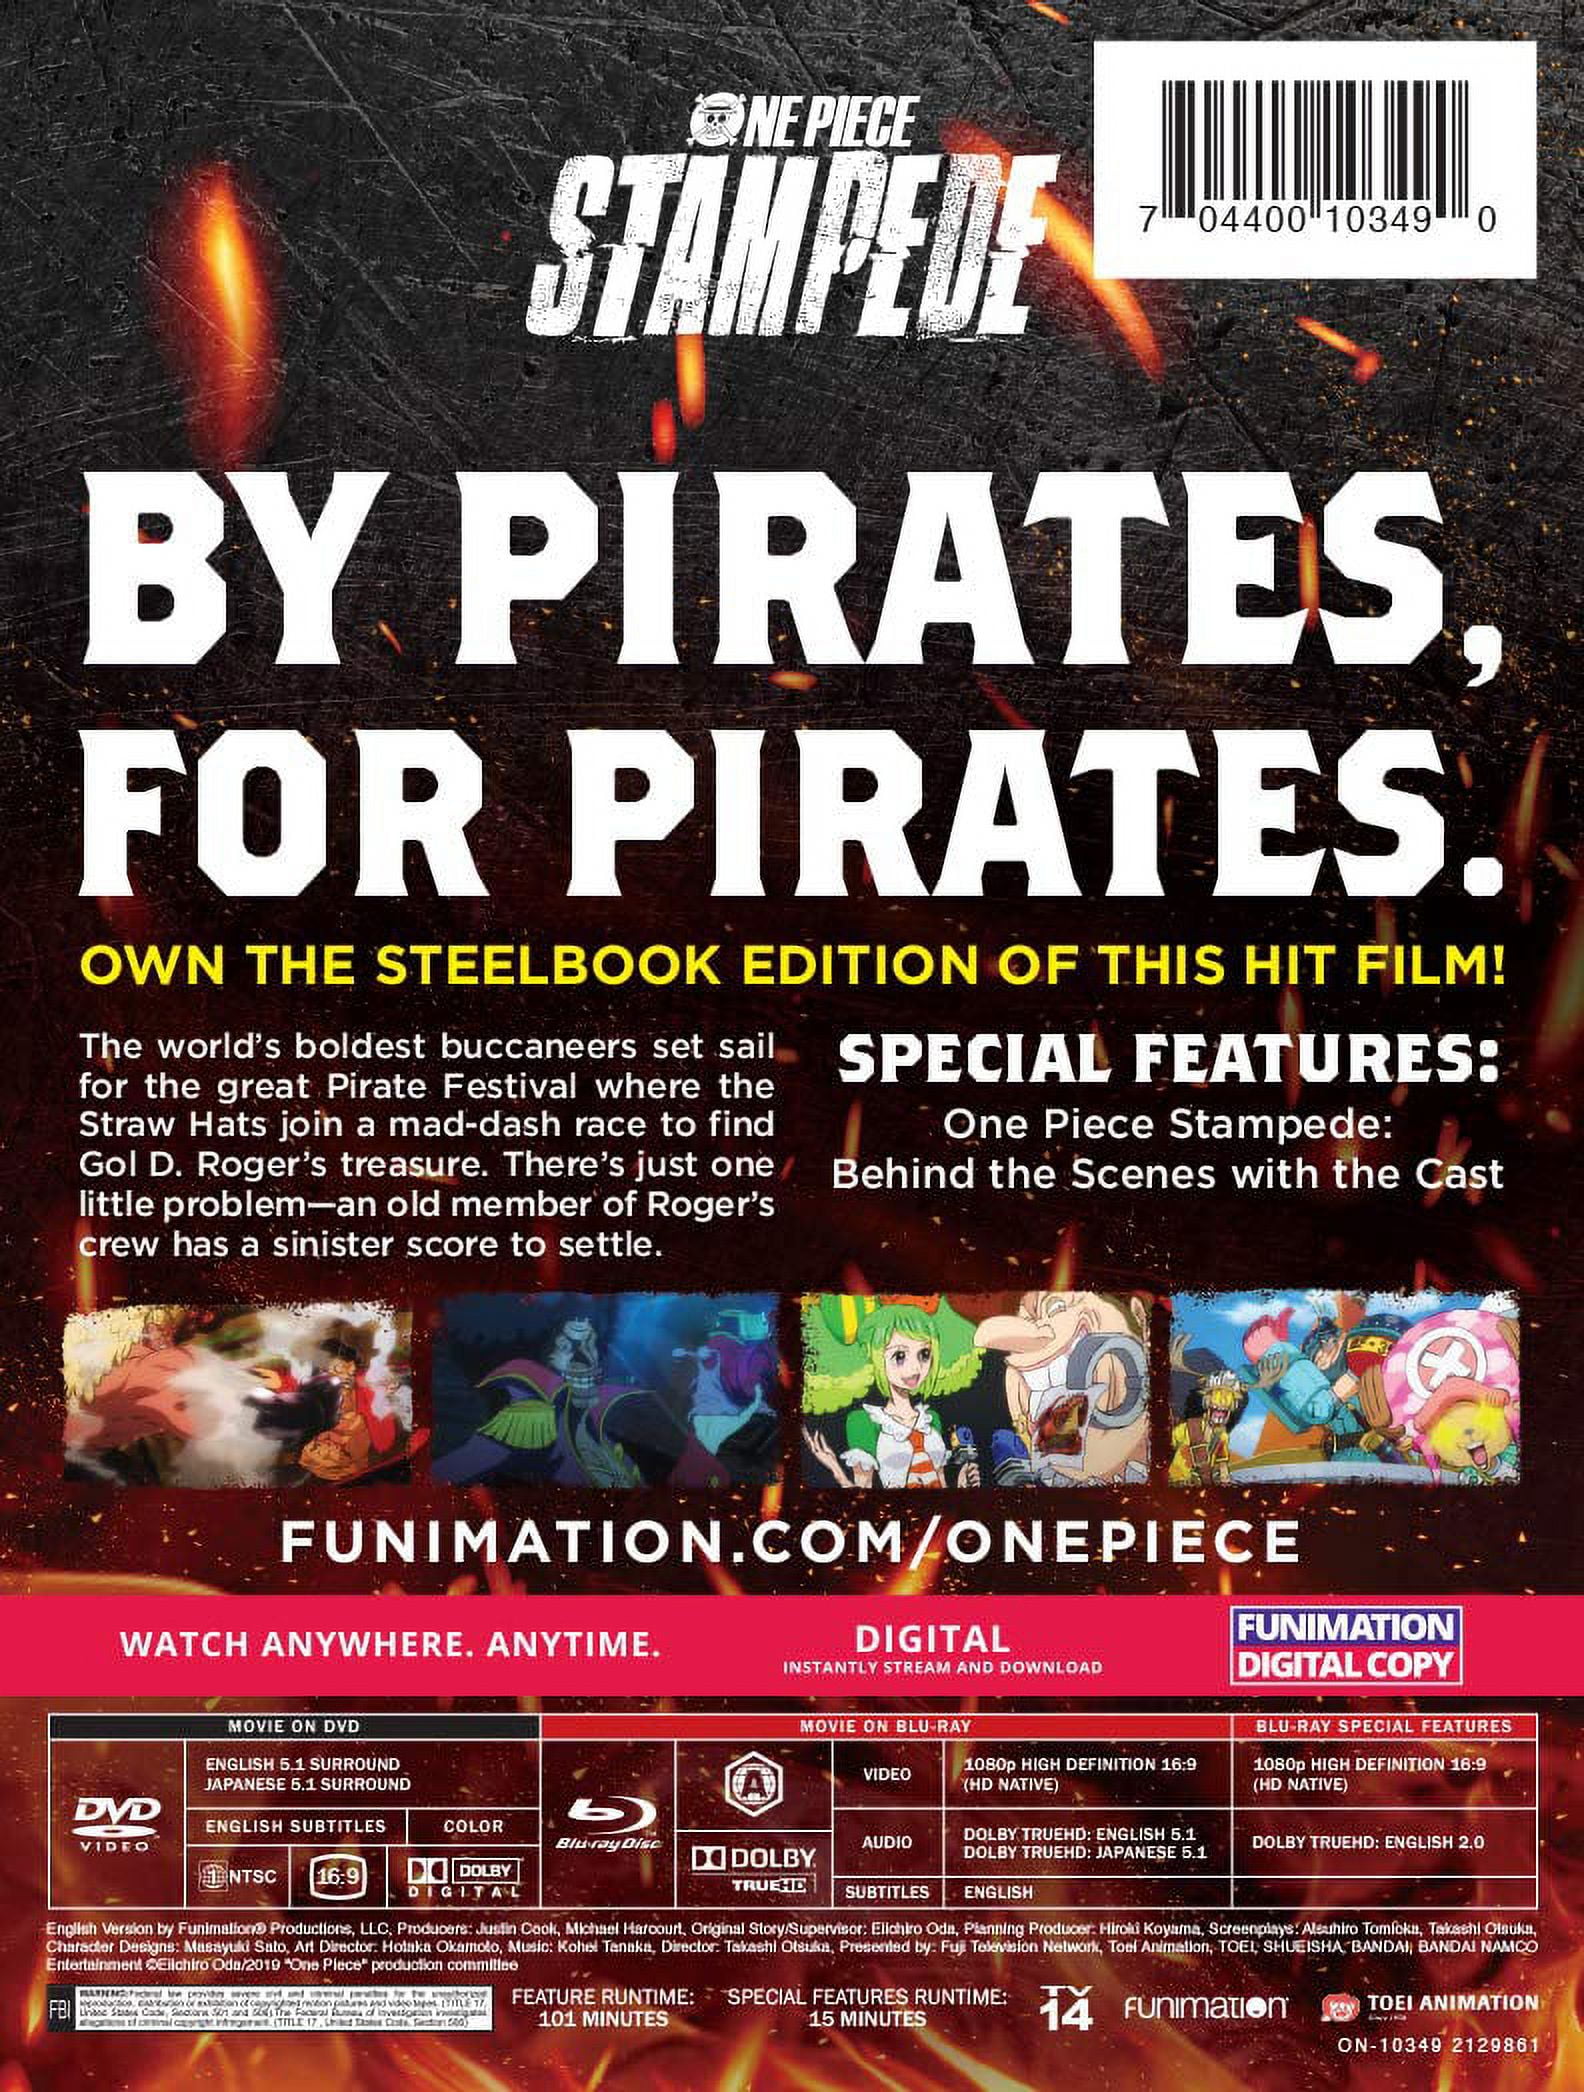 One Piece Stampede Poster for Sale - Merch Fuse